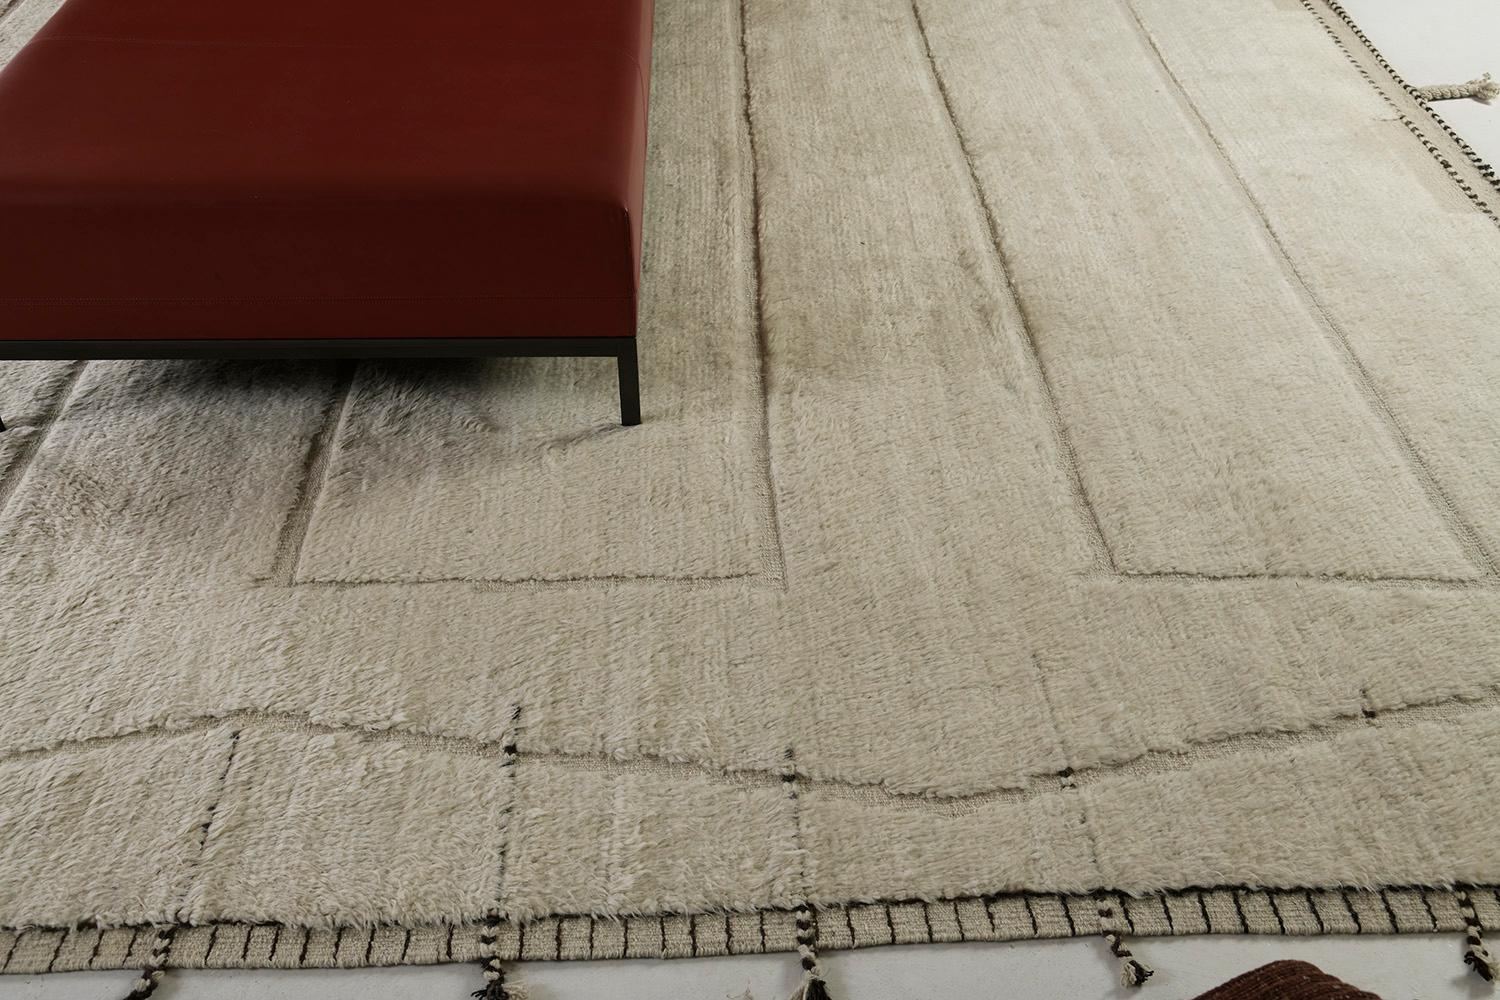 Cierzo is a signature collection of California. It is a handwoven luxurious wool rug made of remarkable natural brown design elements. Haute Bohemian collection: designed in Los Angeles named for the winds knitting together seasons, trees, dwellers